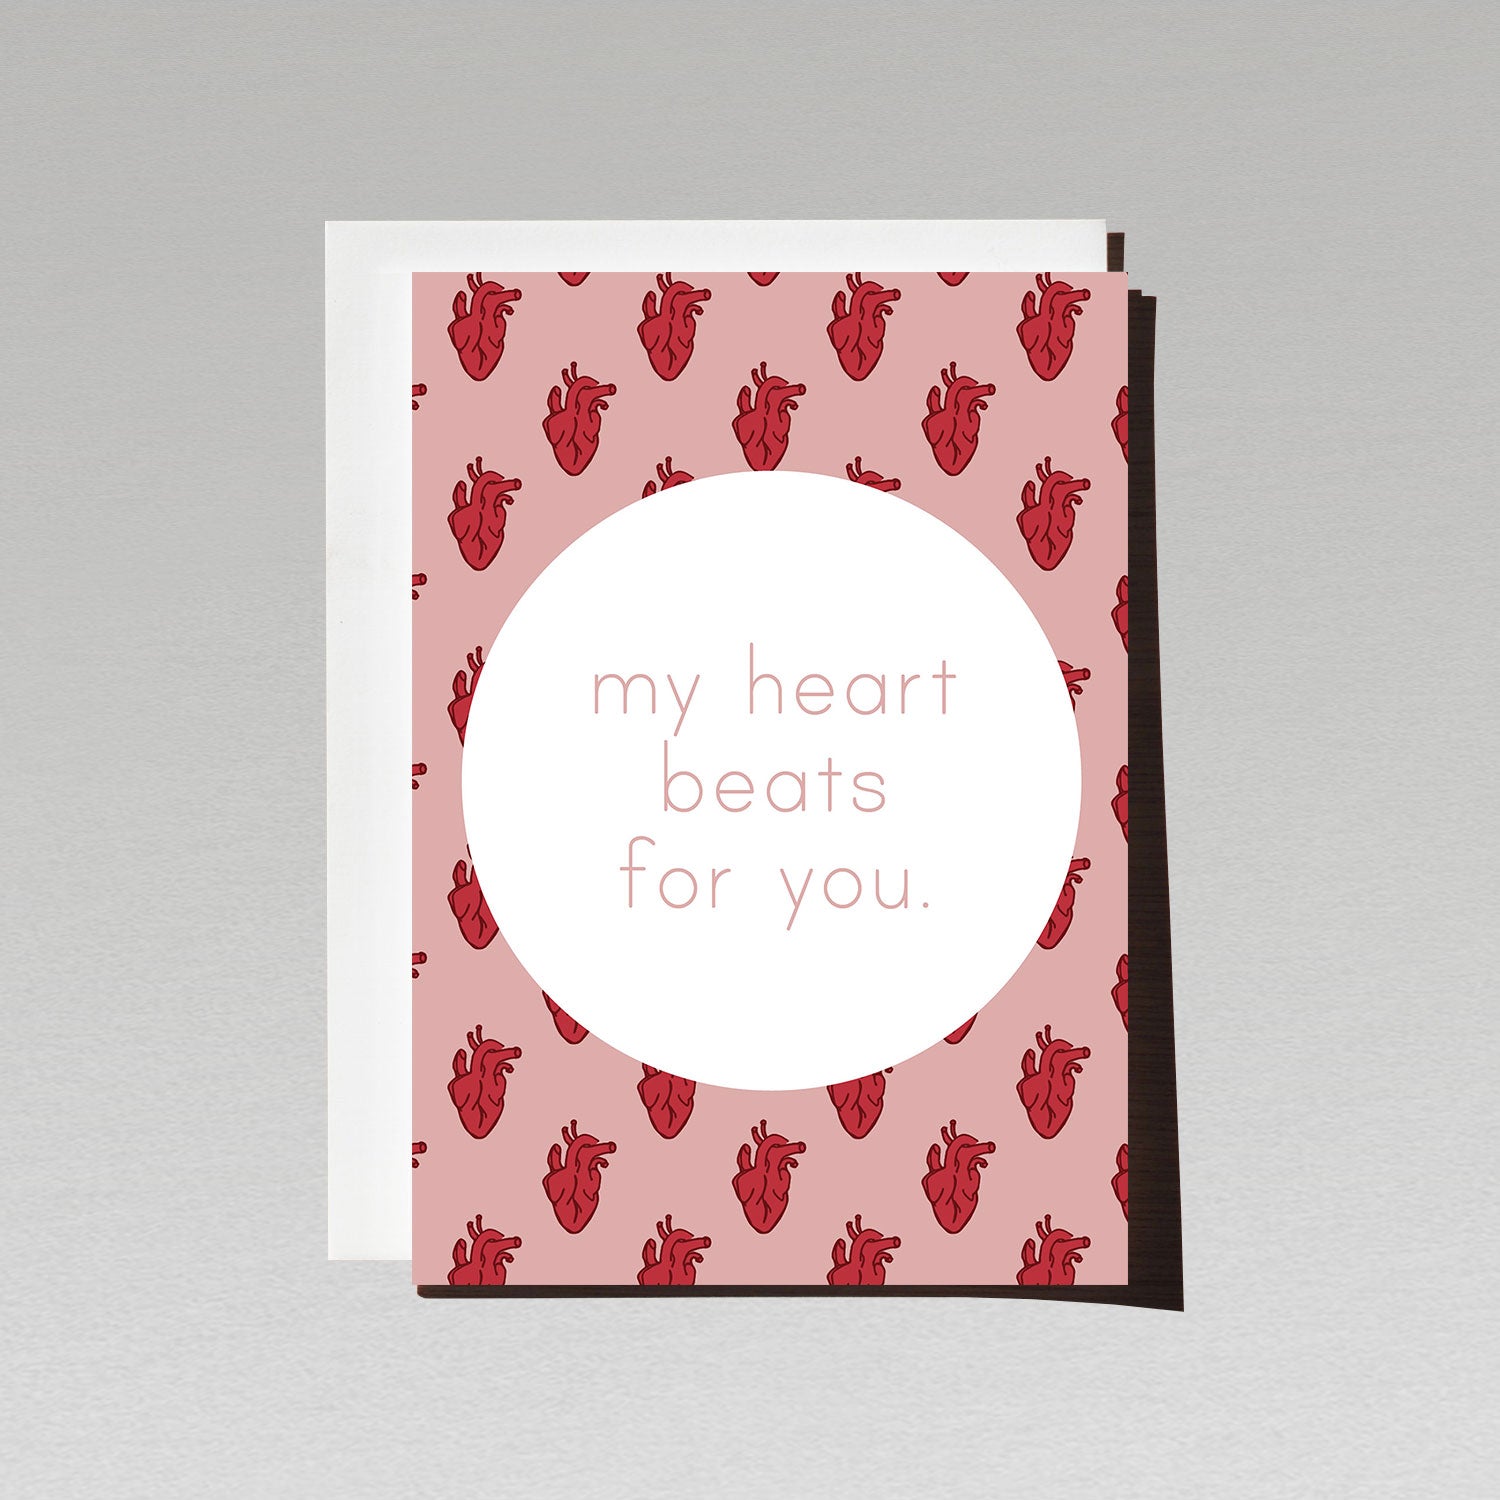 Greeting card with red anatomical hearts on pink background with text My heart beats for you